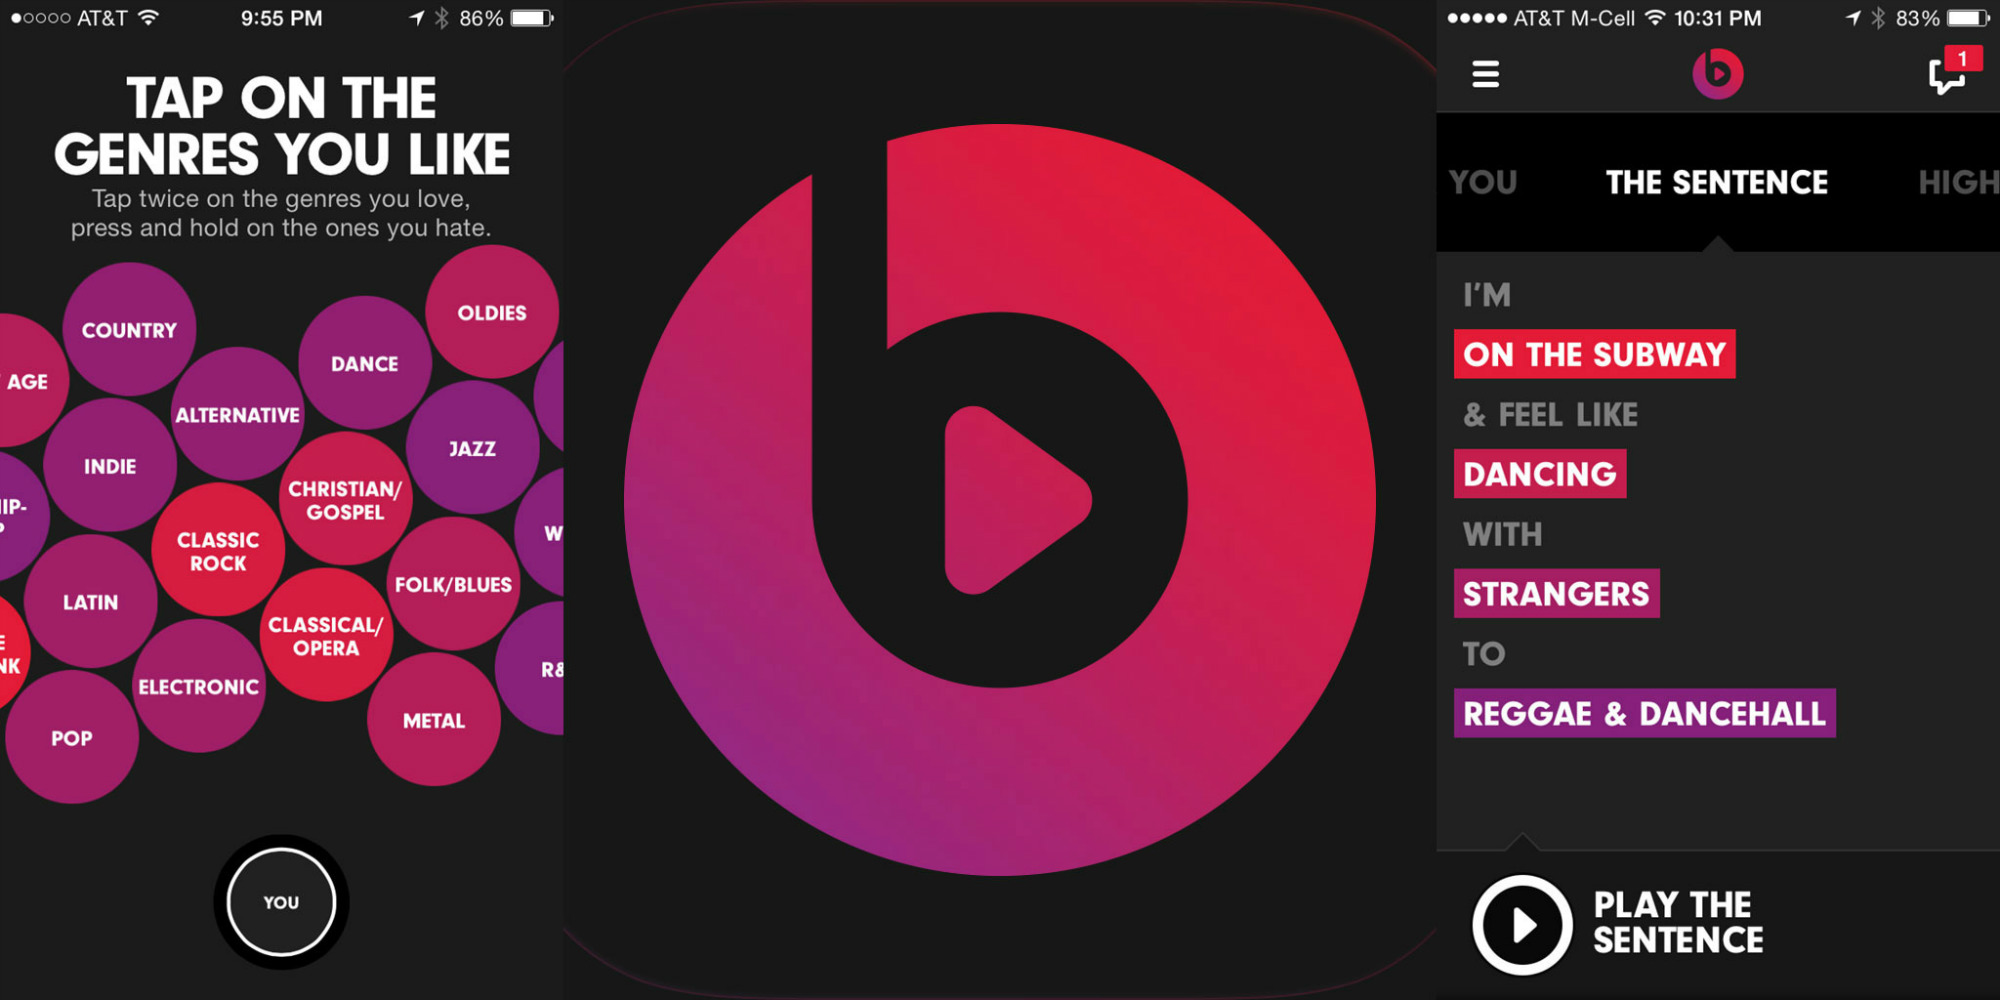 Apple-Apparently-Preparing-to-Integrate-Beats-Music-With-iTunes-As-Music-Sales-Decline